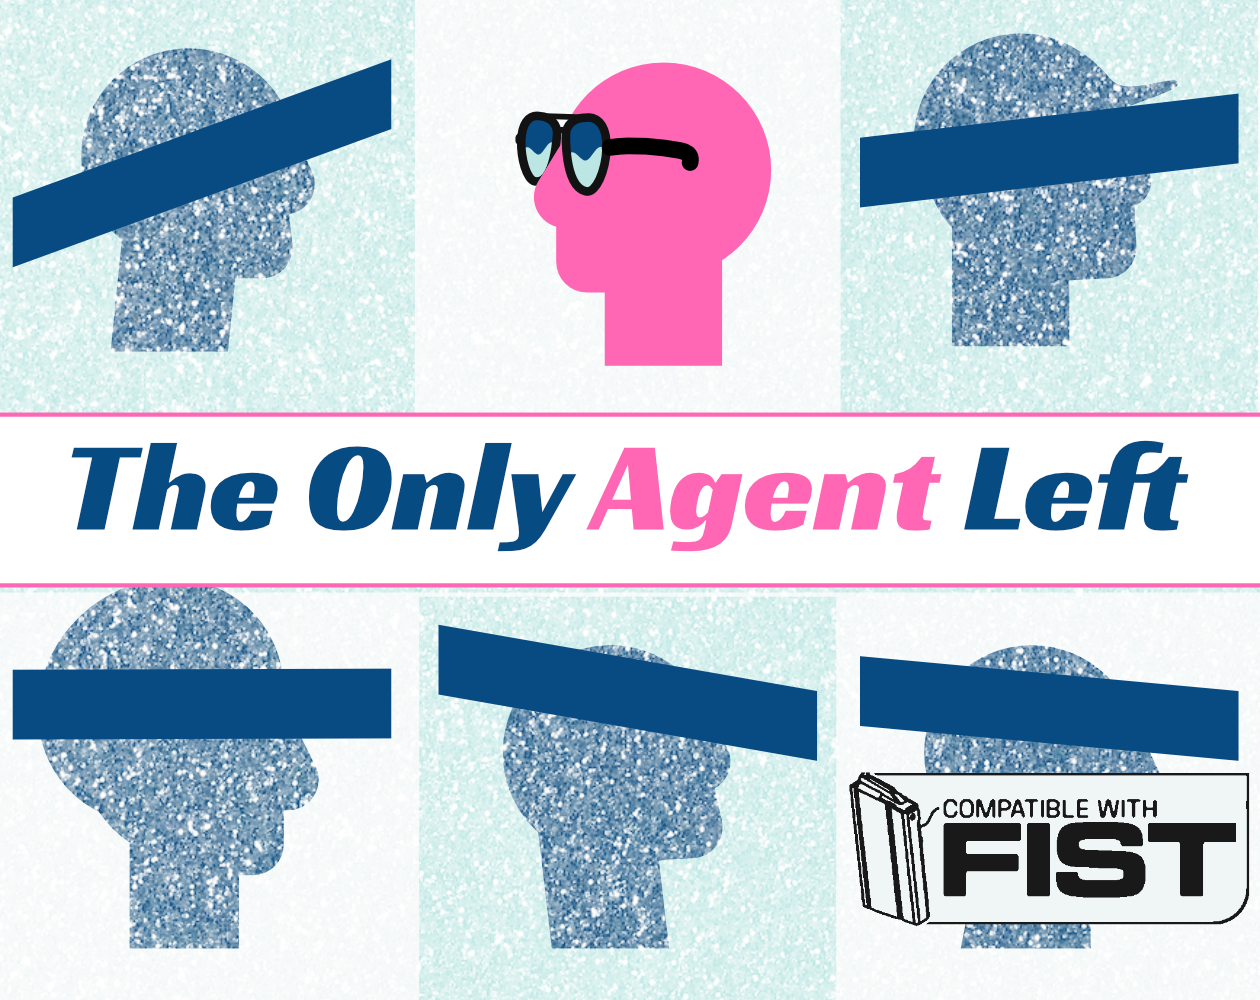 The Only Agent Left, blue faces with bars across their eyes surround a pink face wearing sunglasses.